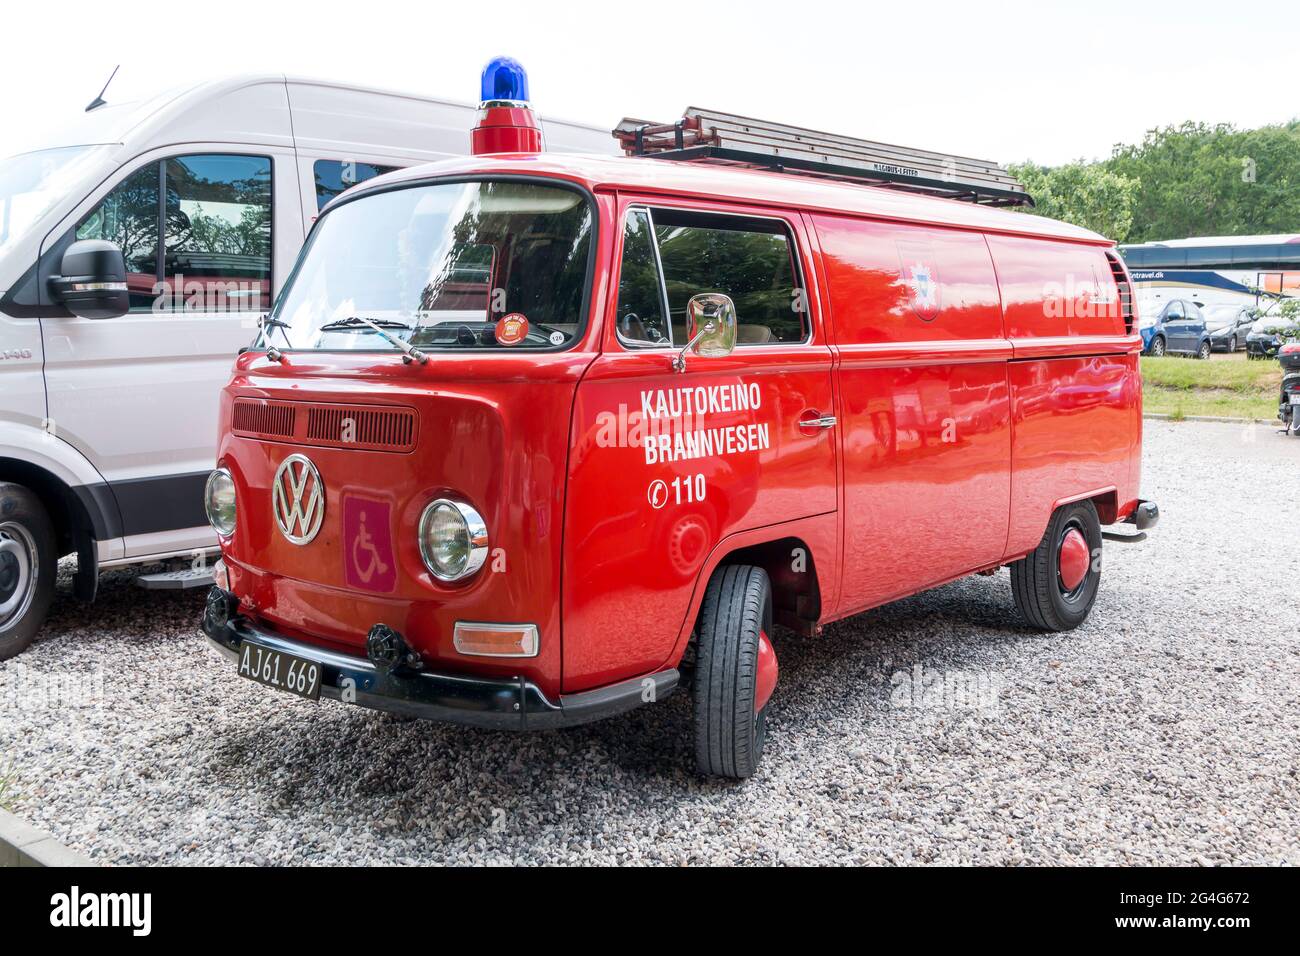 Auning, denmark - 19 June 2021: Old red vw bubble as fire truck, Stock Photo